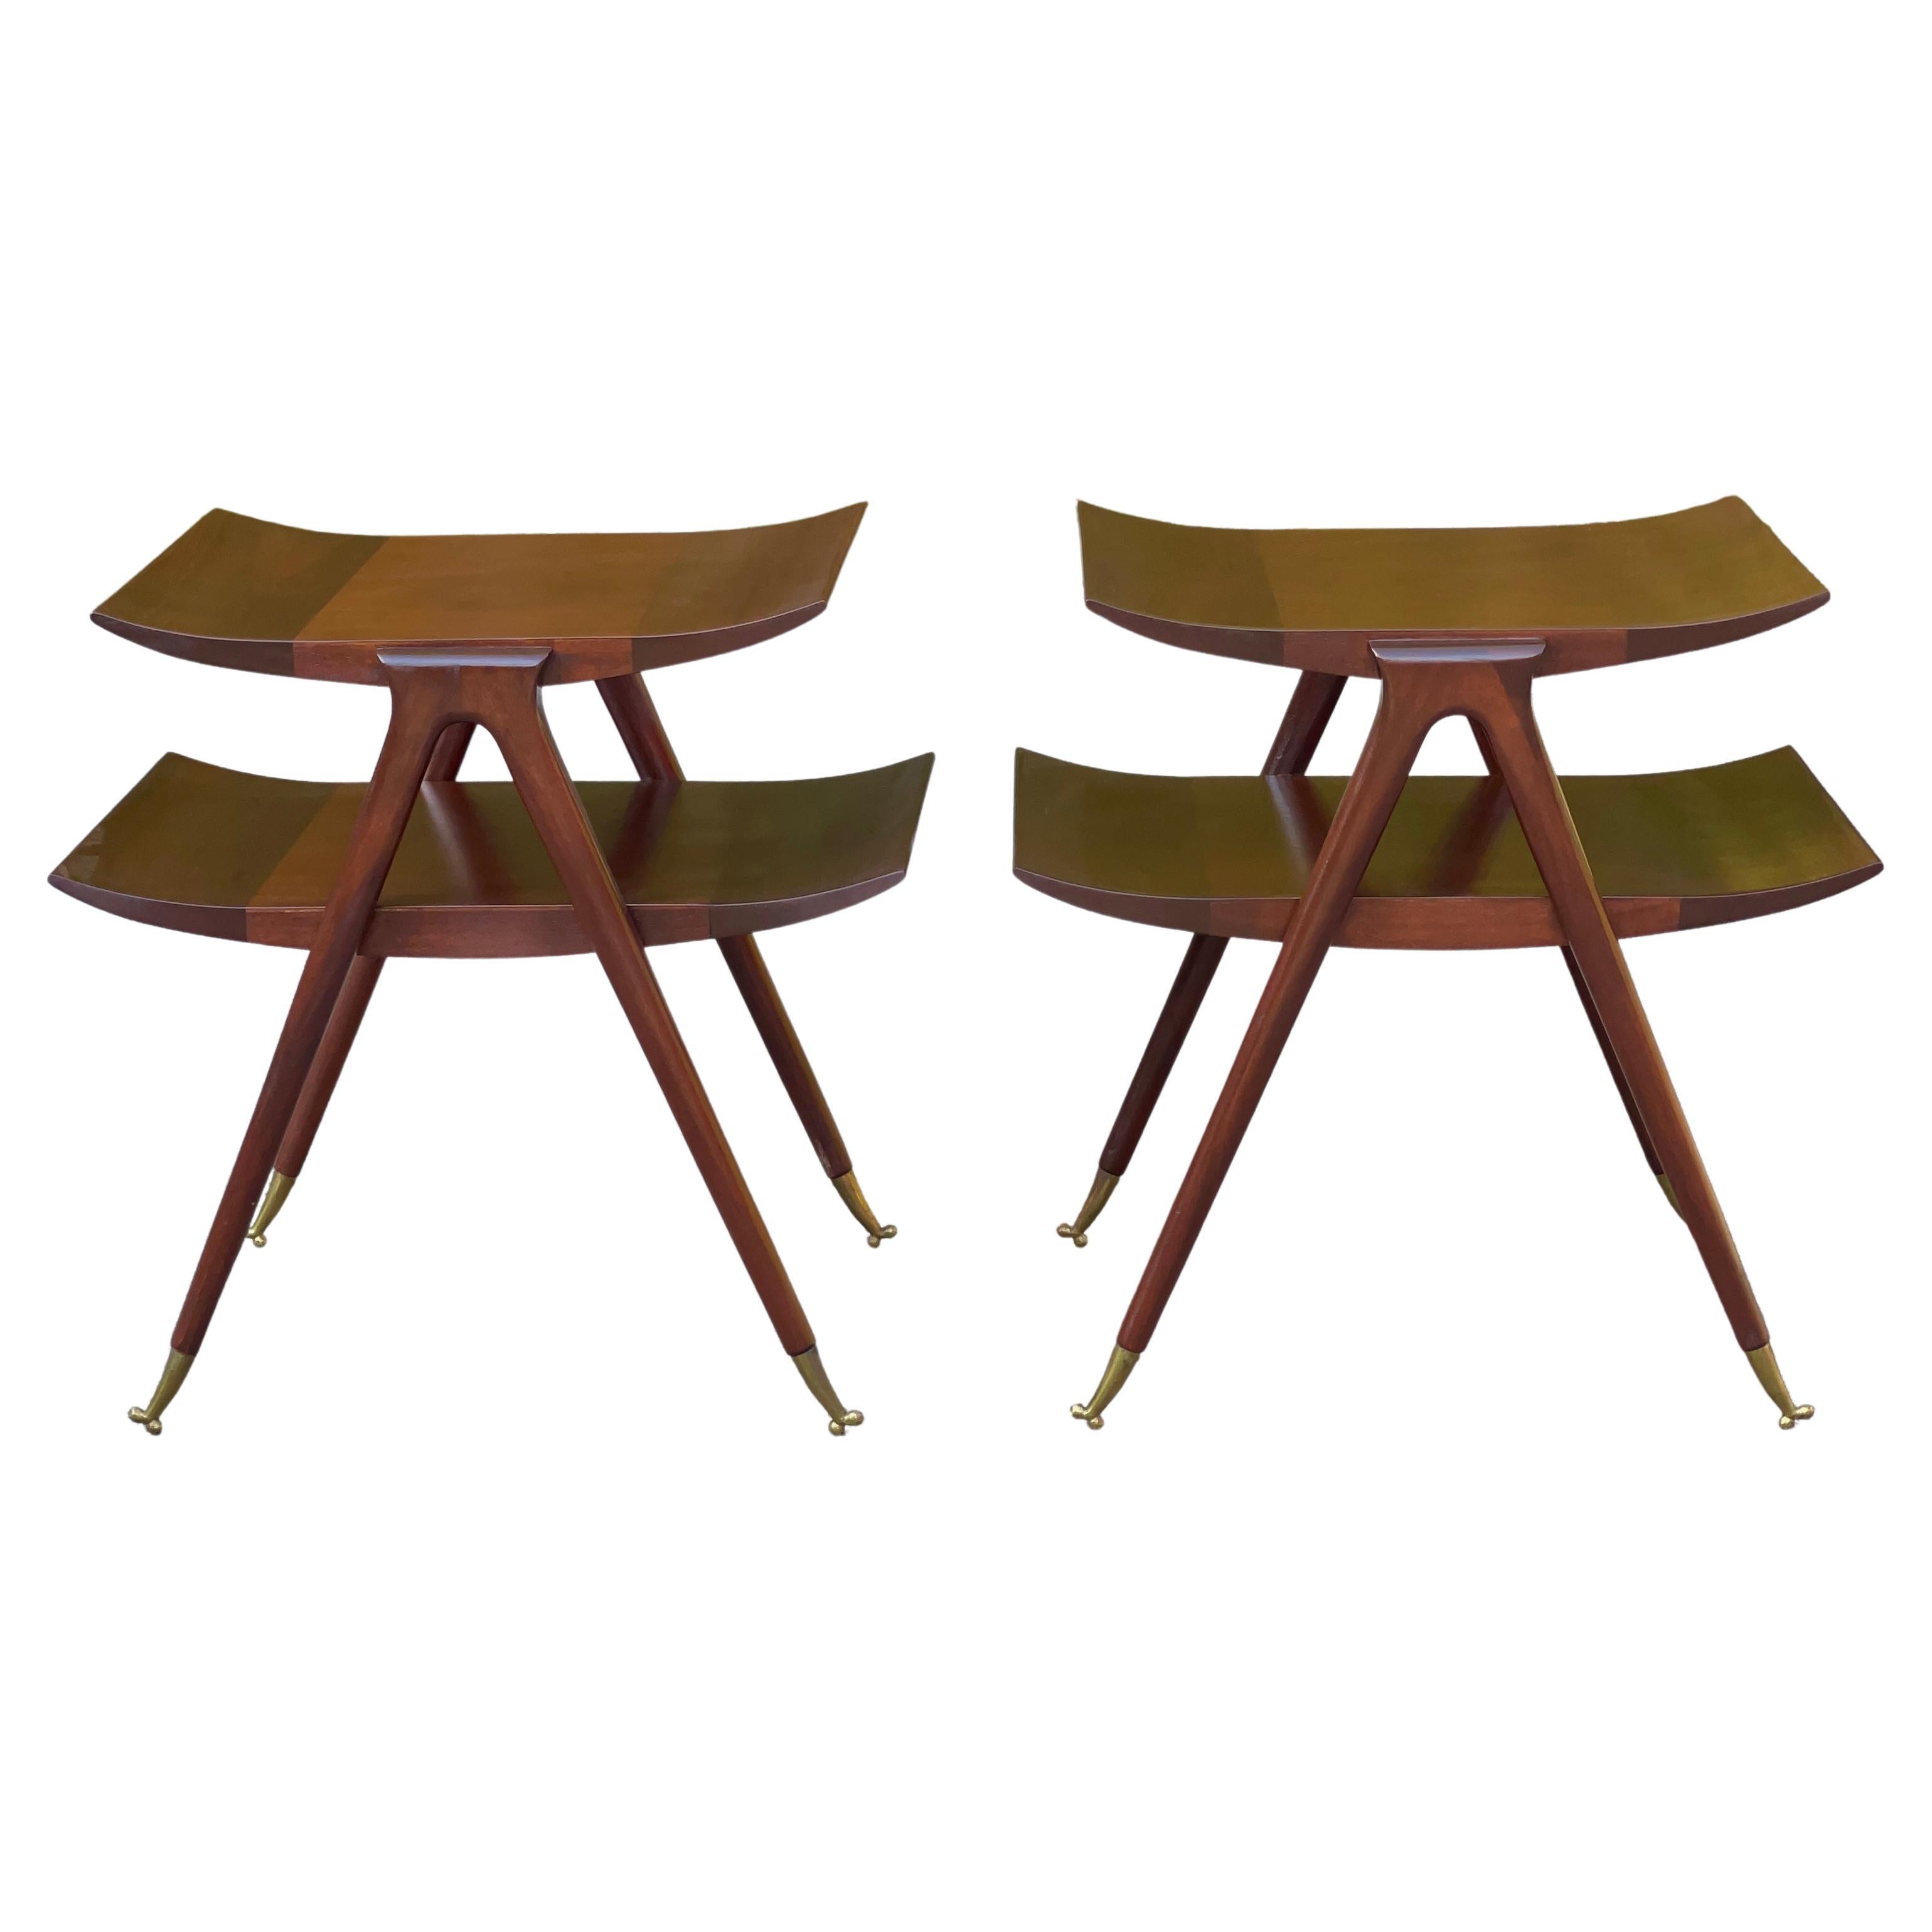 Pair of Two Tier Side Tables in the Style of Ico Parisi